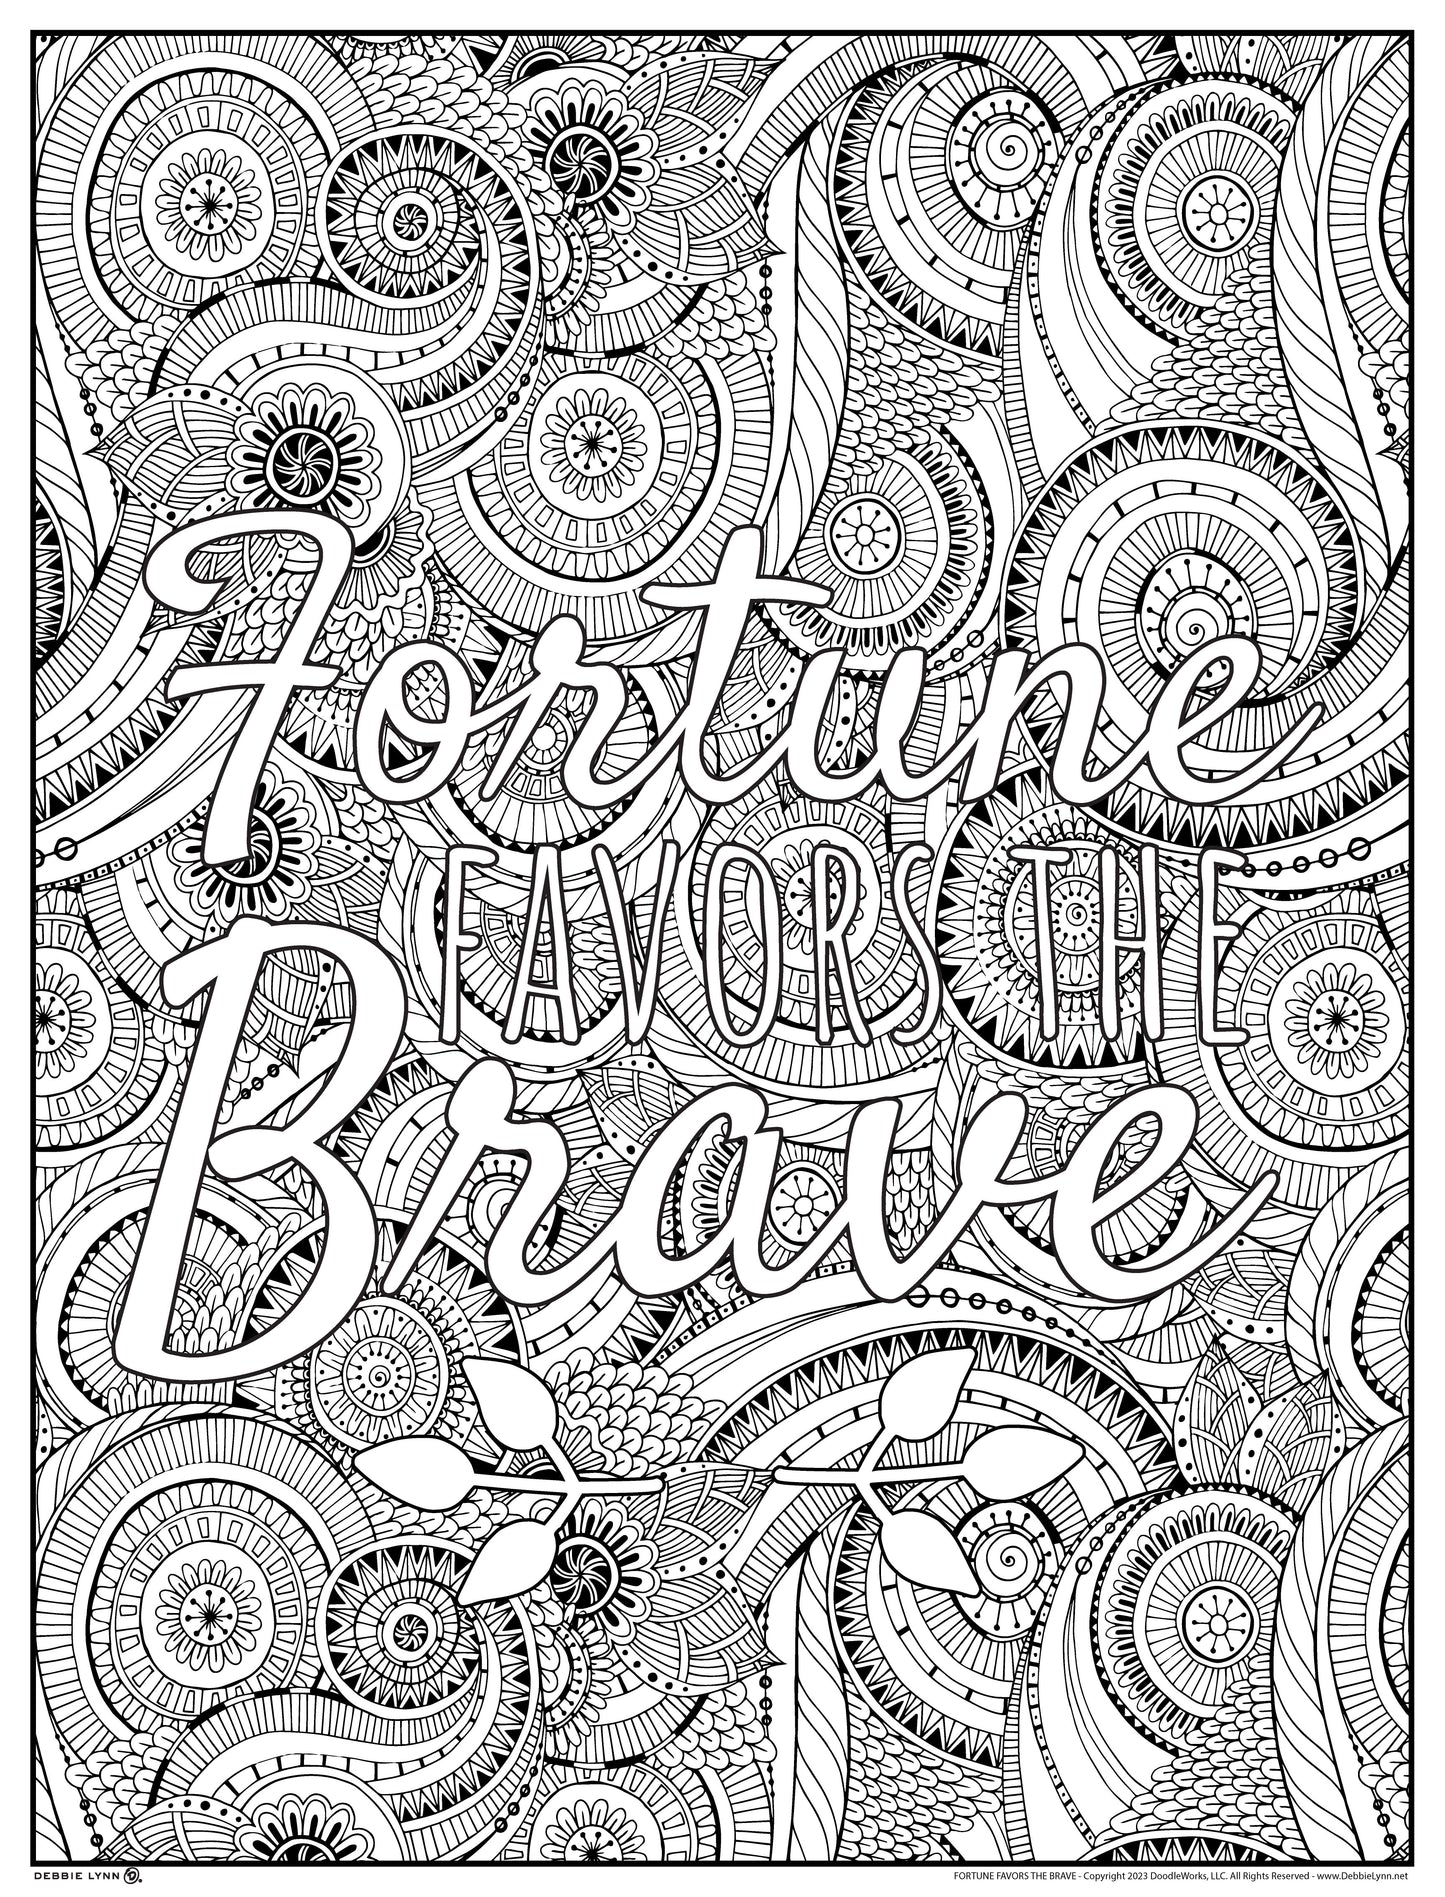 Fortune Favors the Brave Personalized Giant Coloring Poster 46"x60"